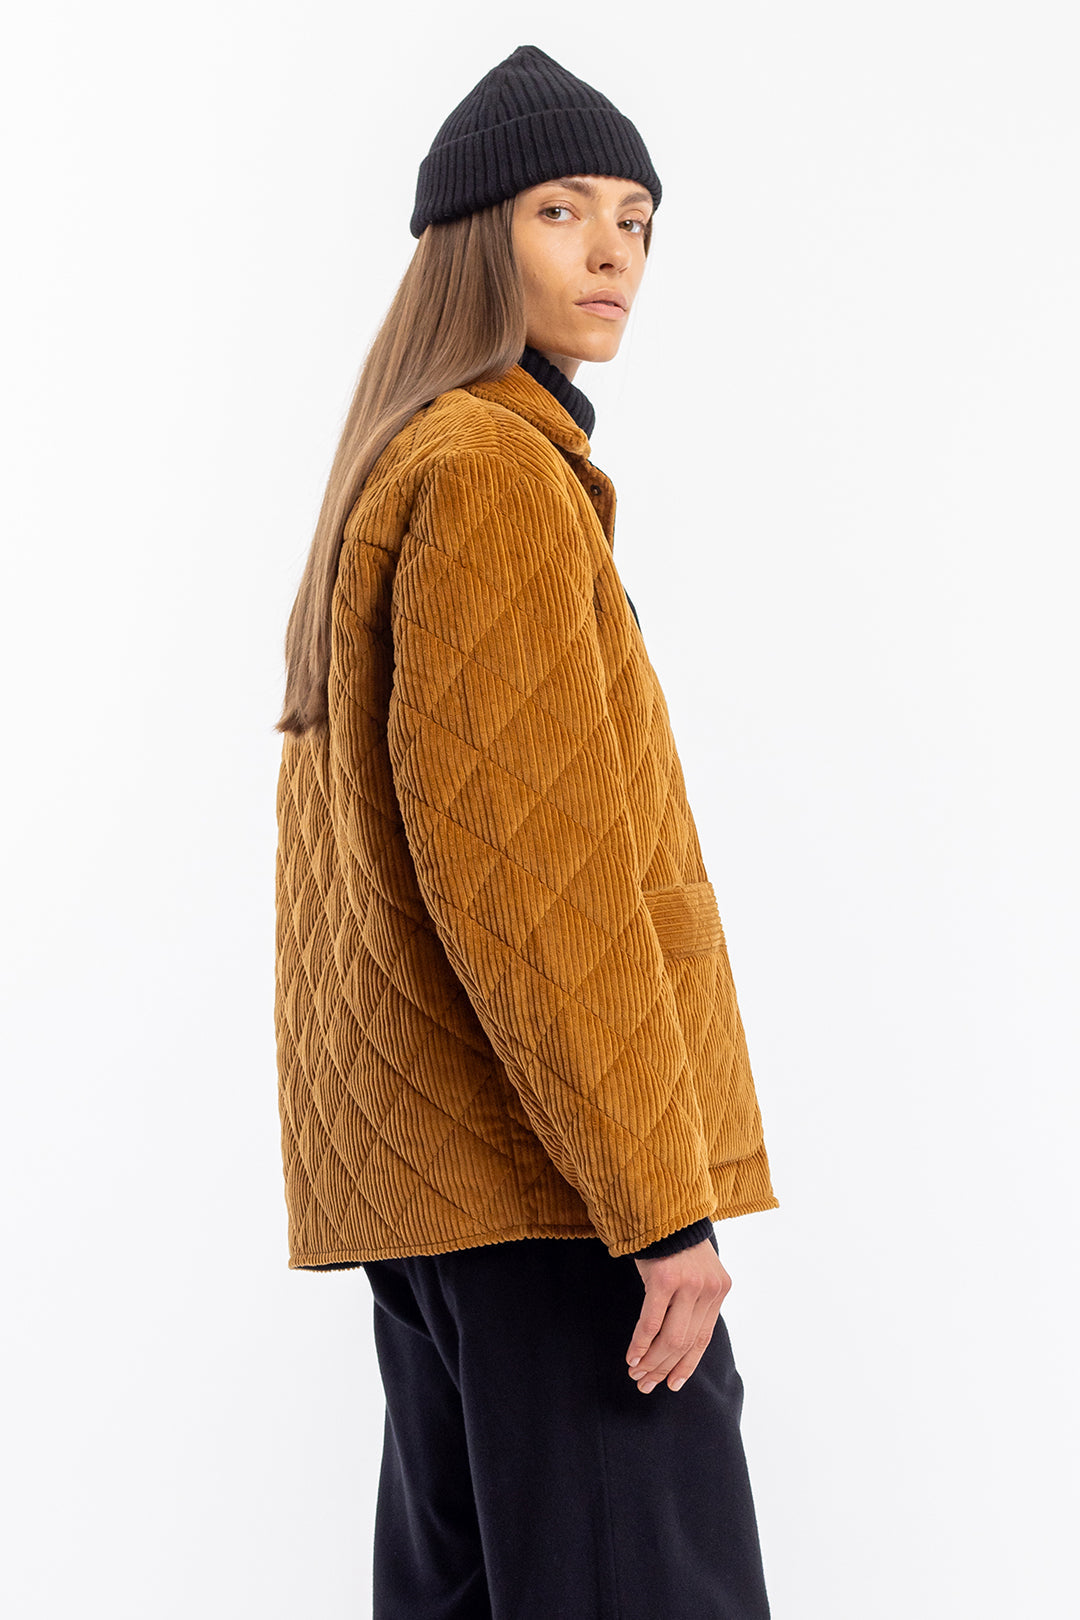 Toffee, quilted corduroy jacket made from organic cotton &amp; recycled PET from Rotholz